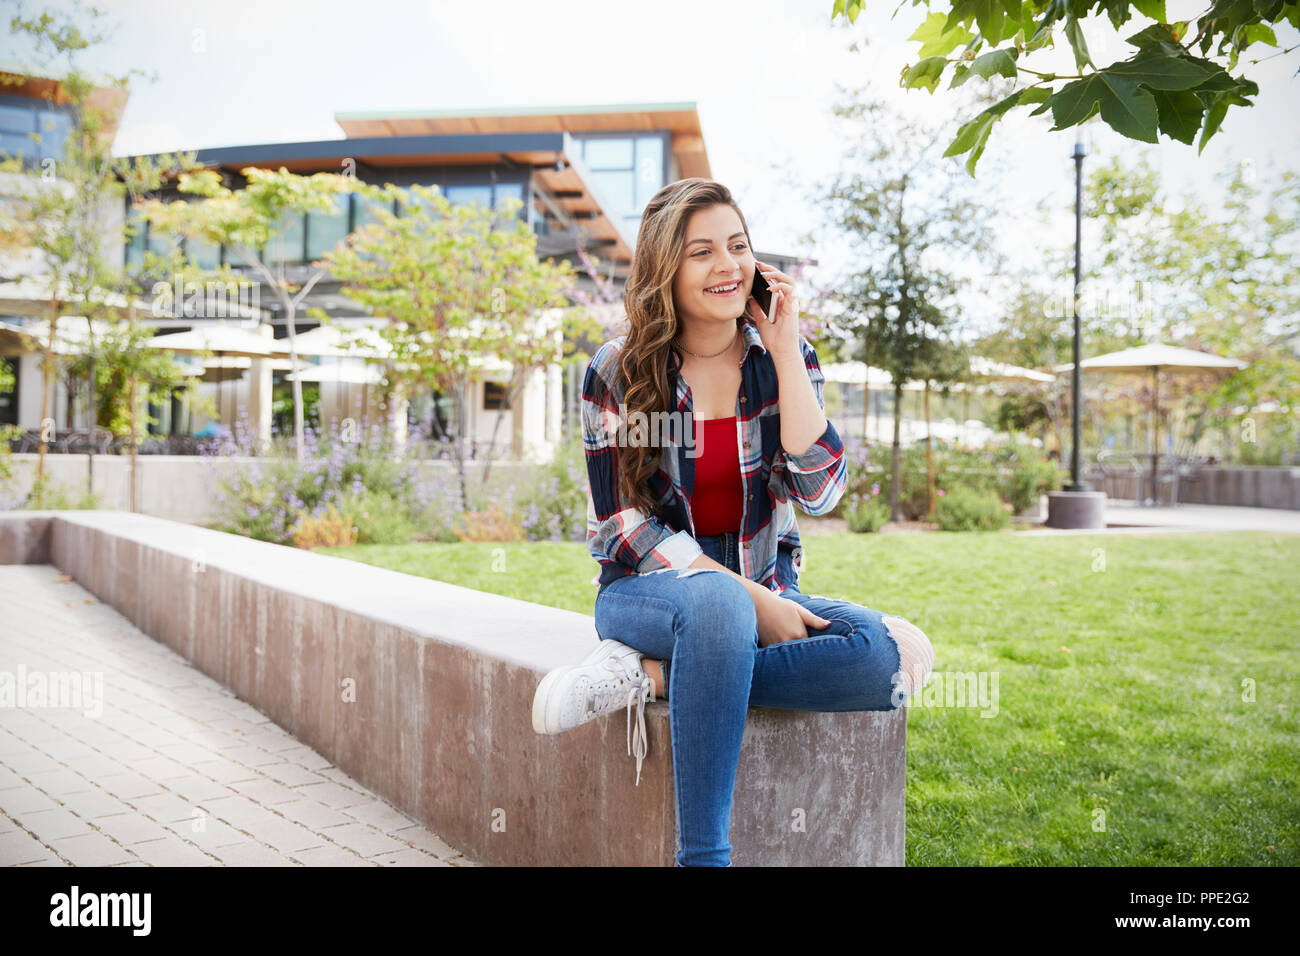 Female High School Student Talking On Mobile Phone Outside College Buildings Stock Photo